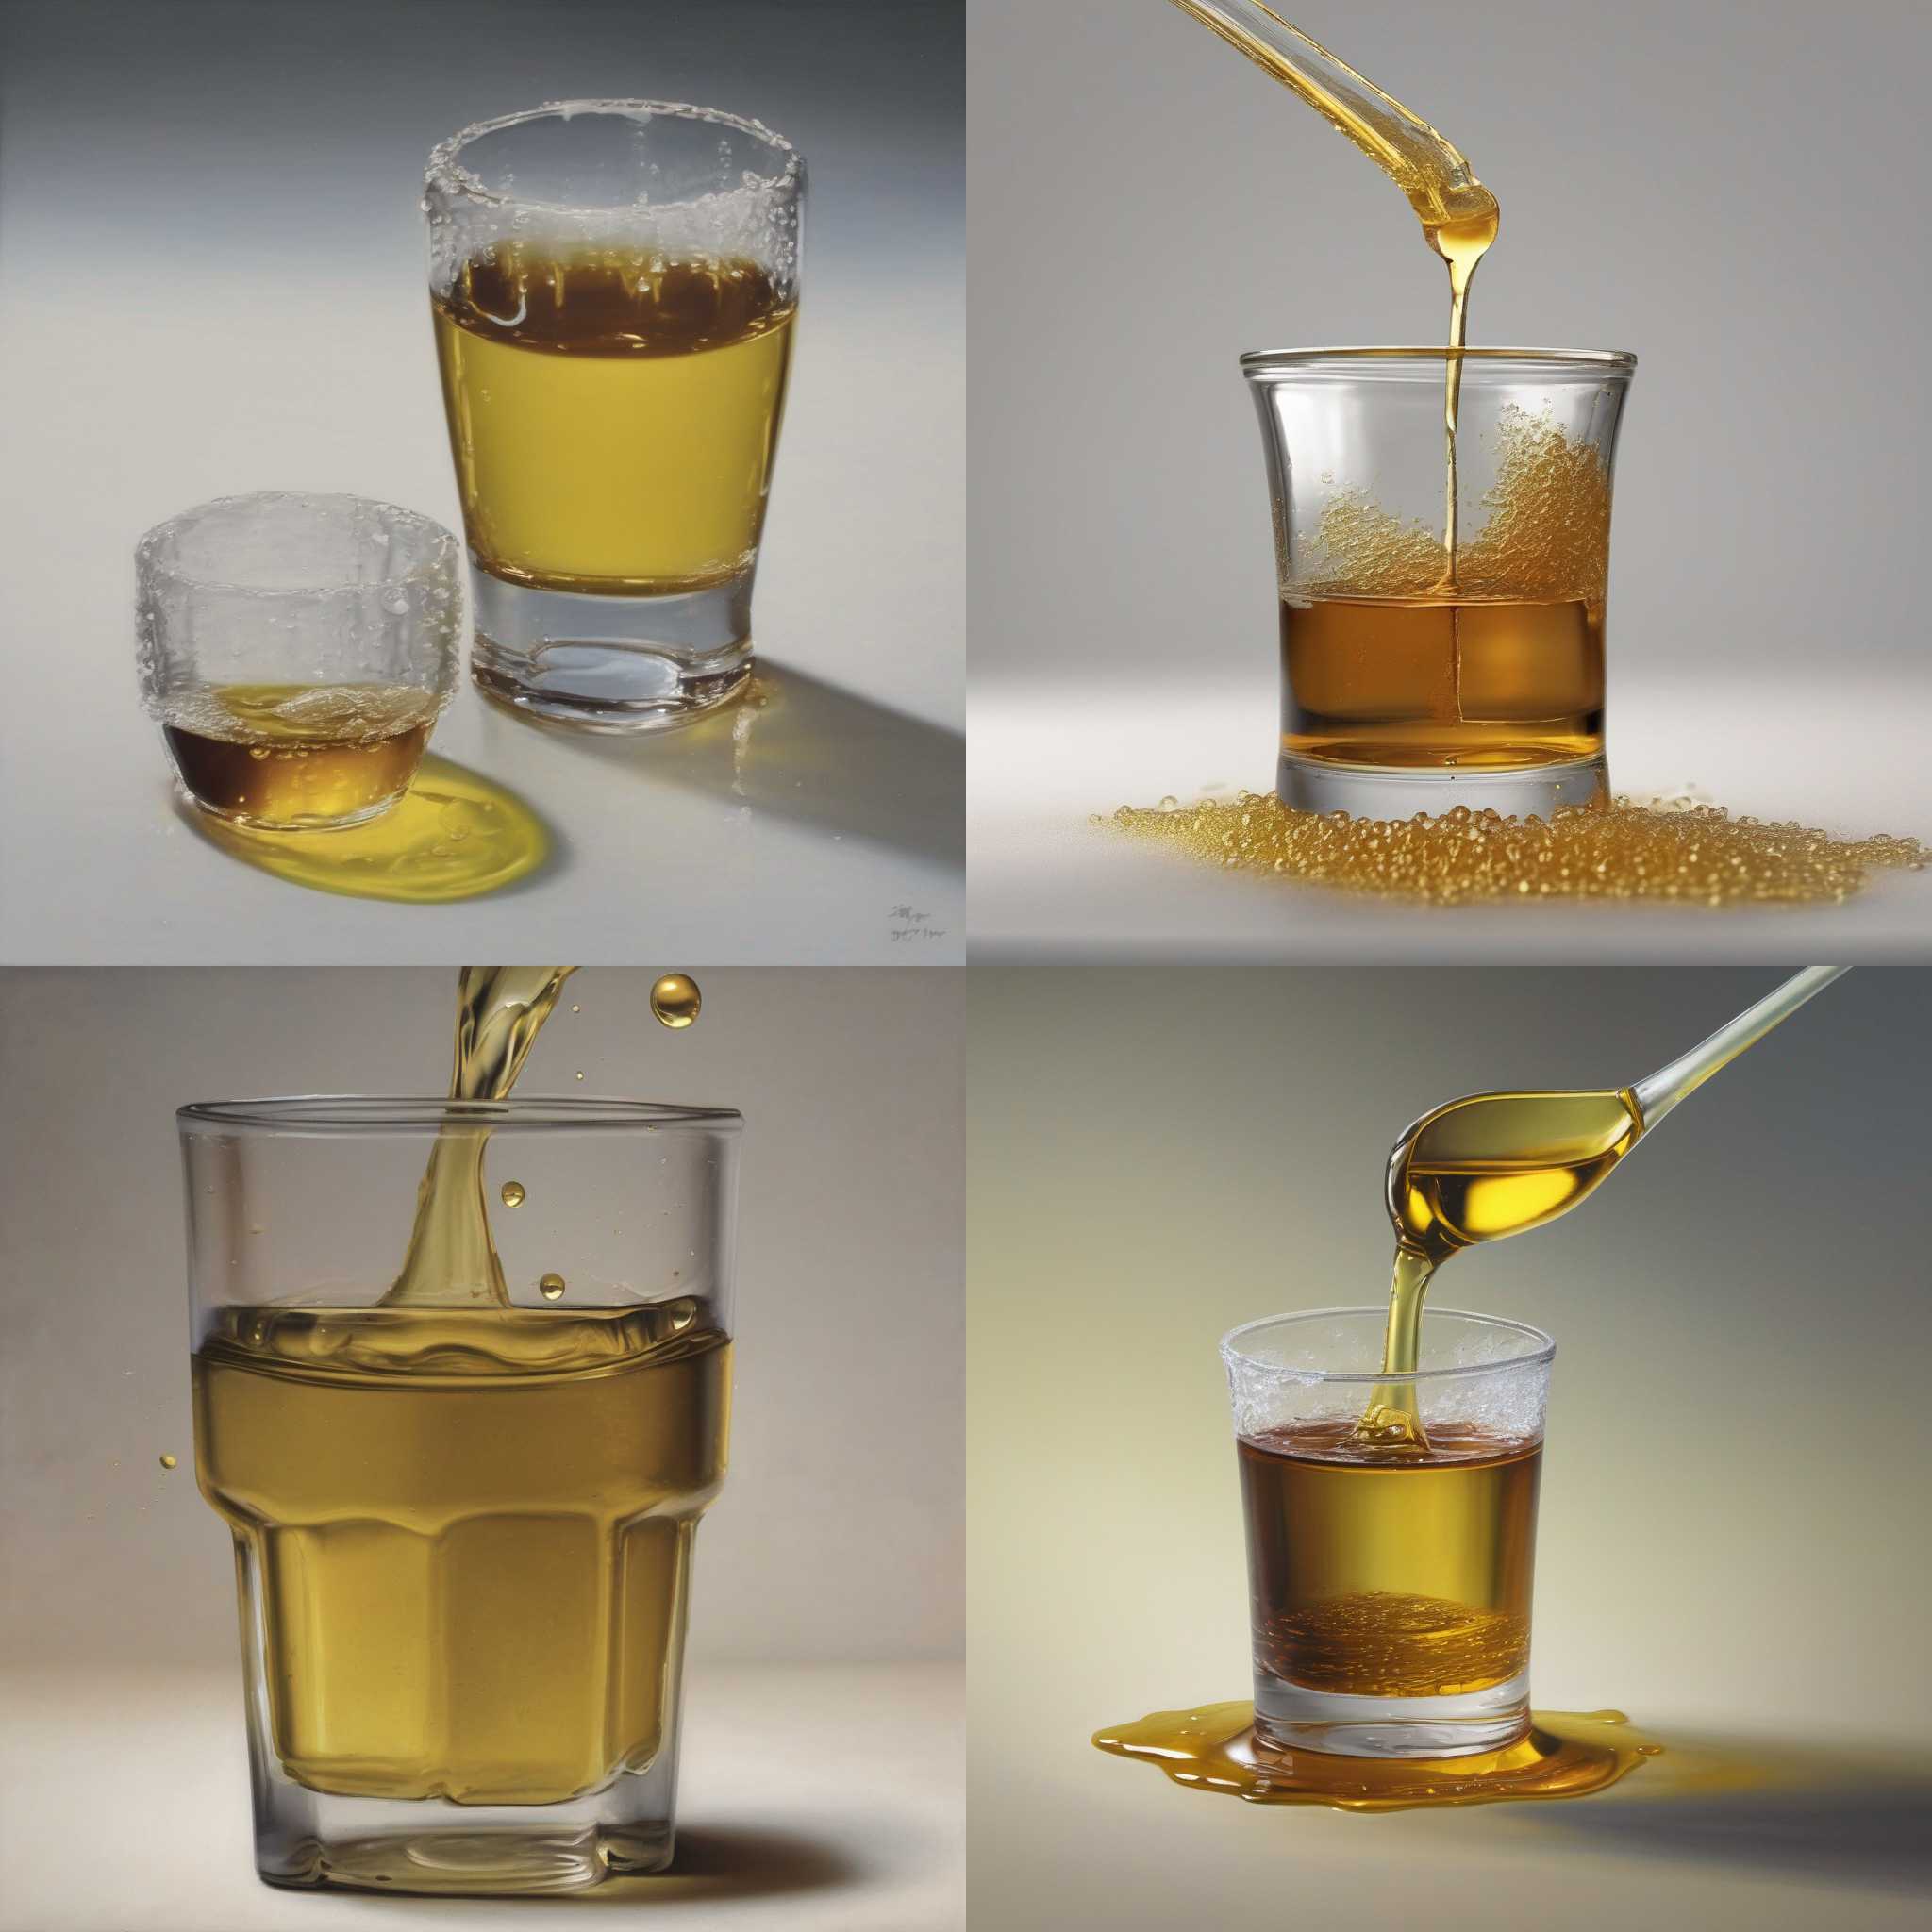 A glass of oil mixed with sugar